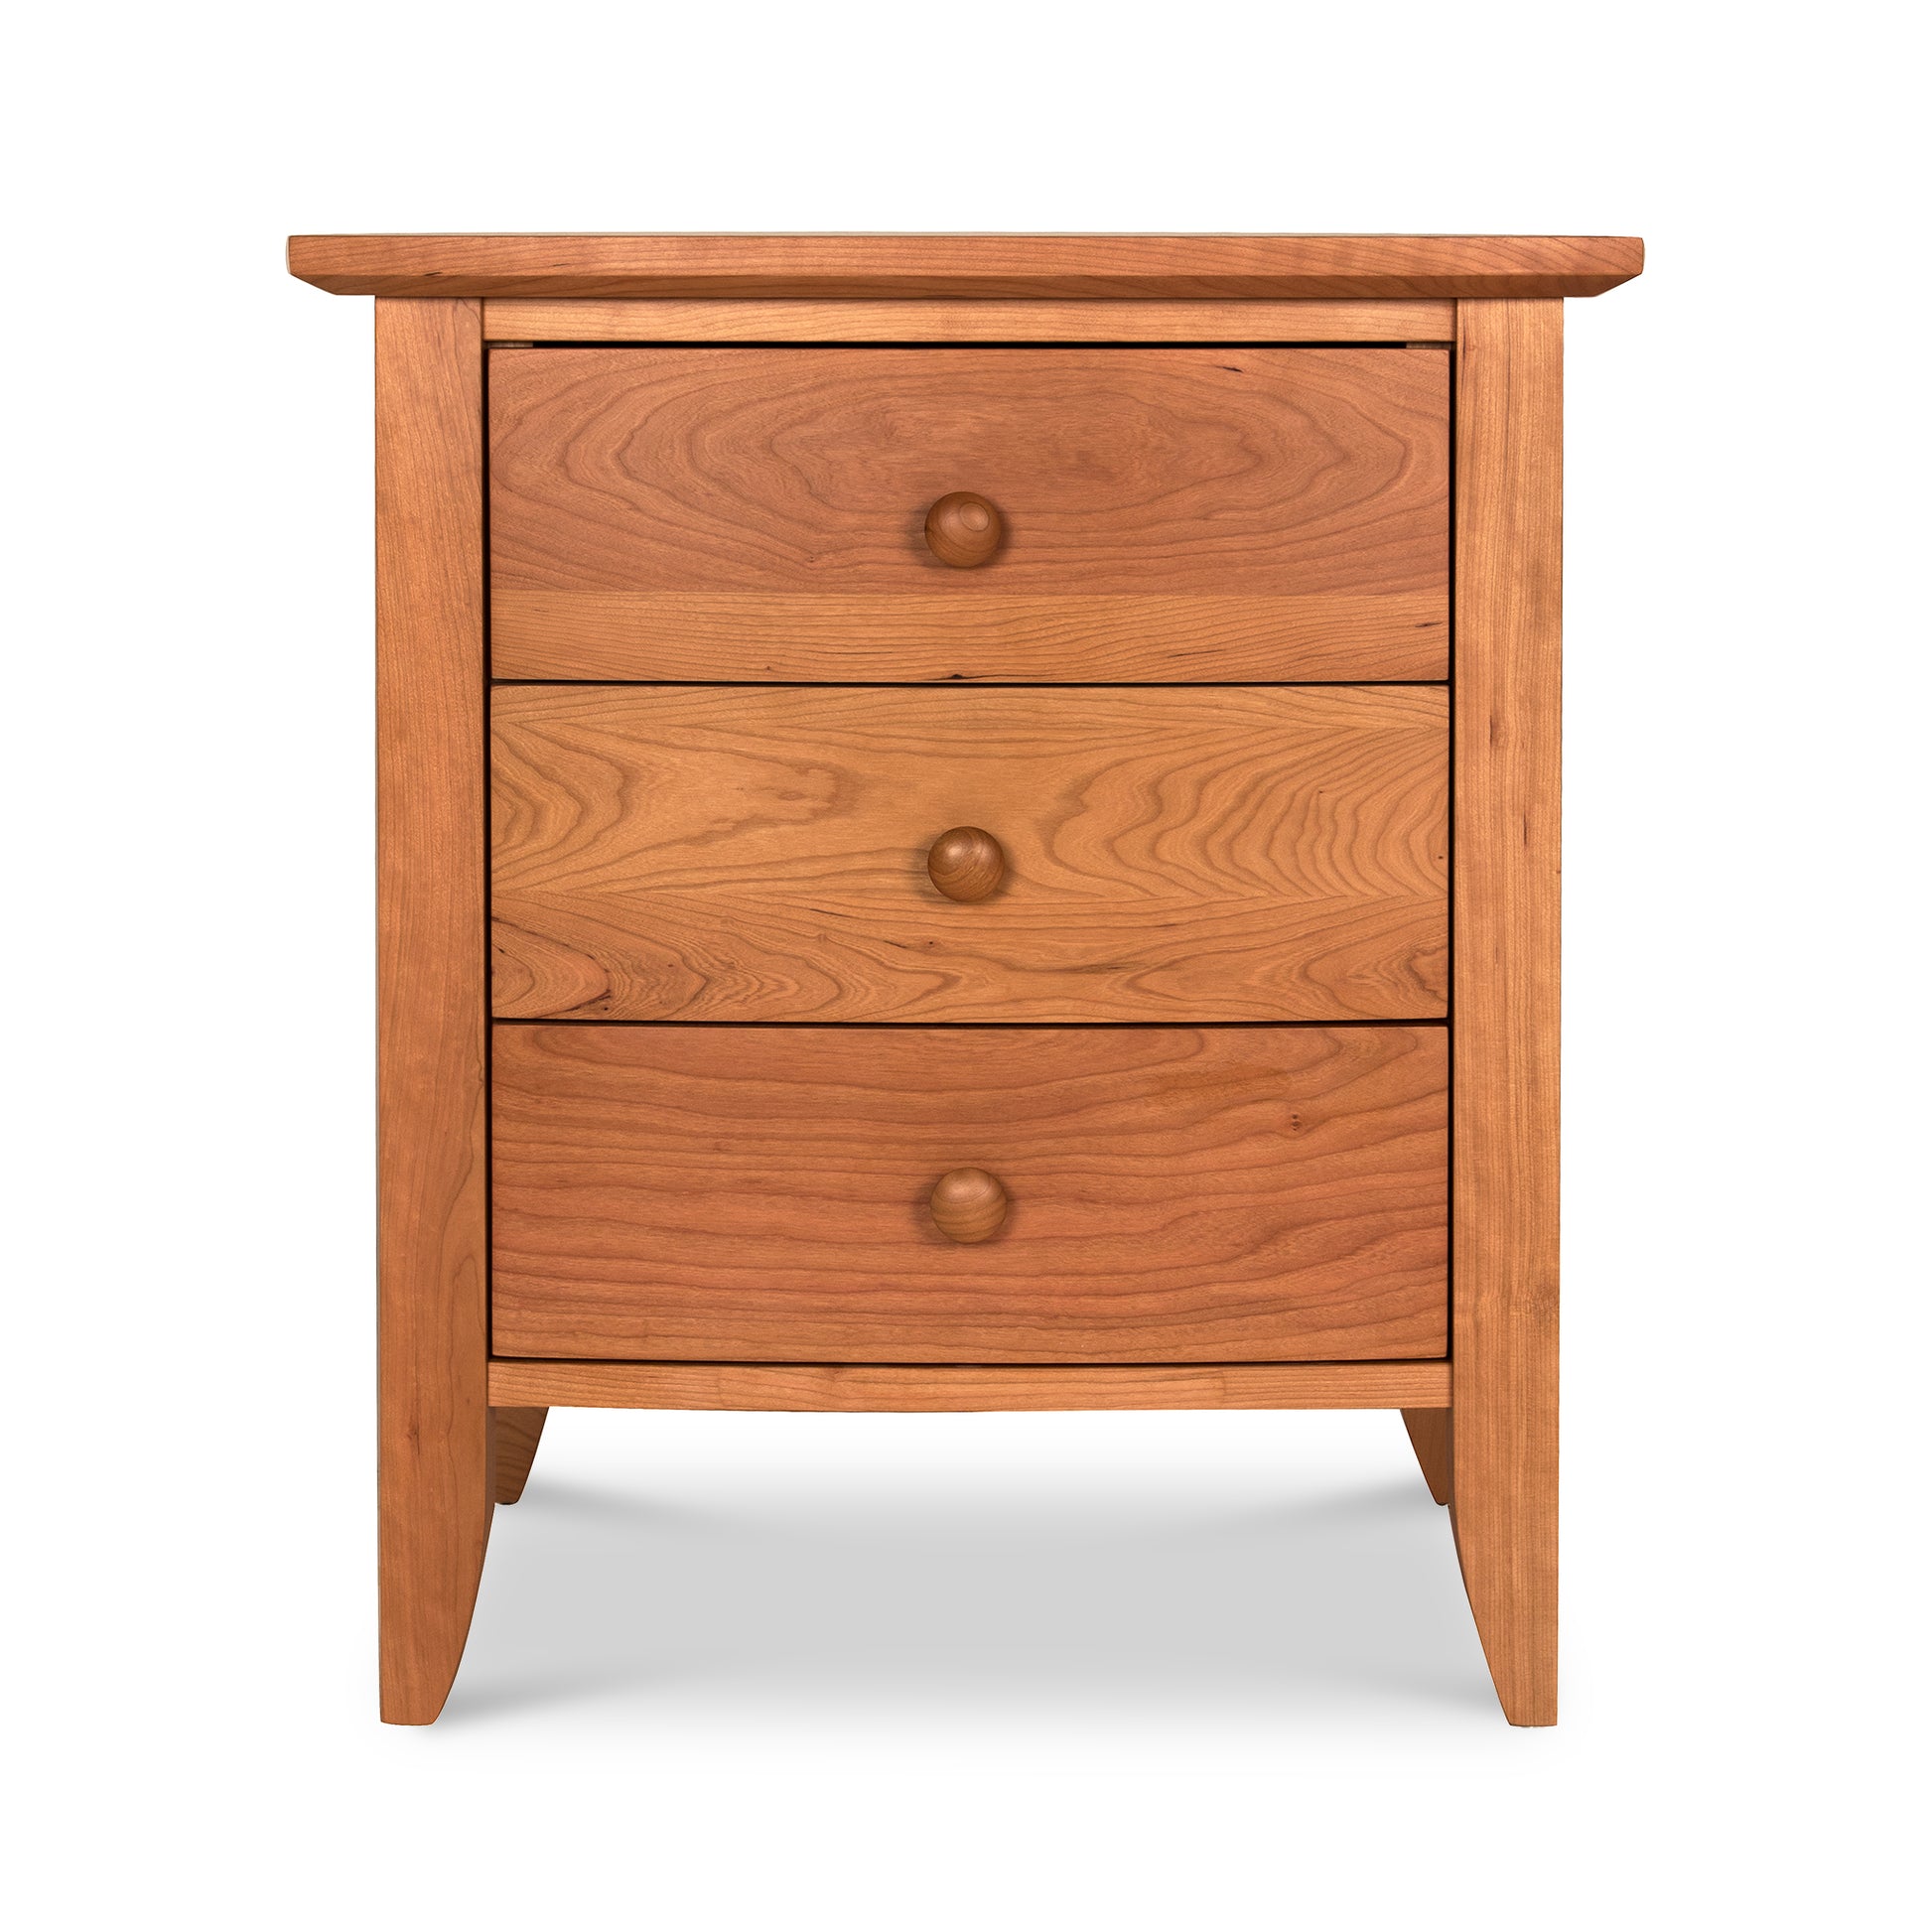 Purchase a Bow Front 3-Drawer Nightstand - Clearance from Lyndon Furniture from our showroom.